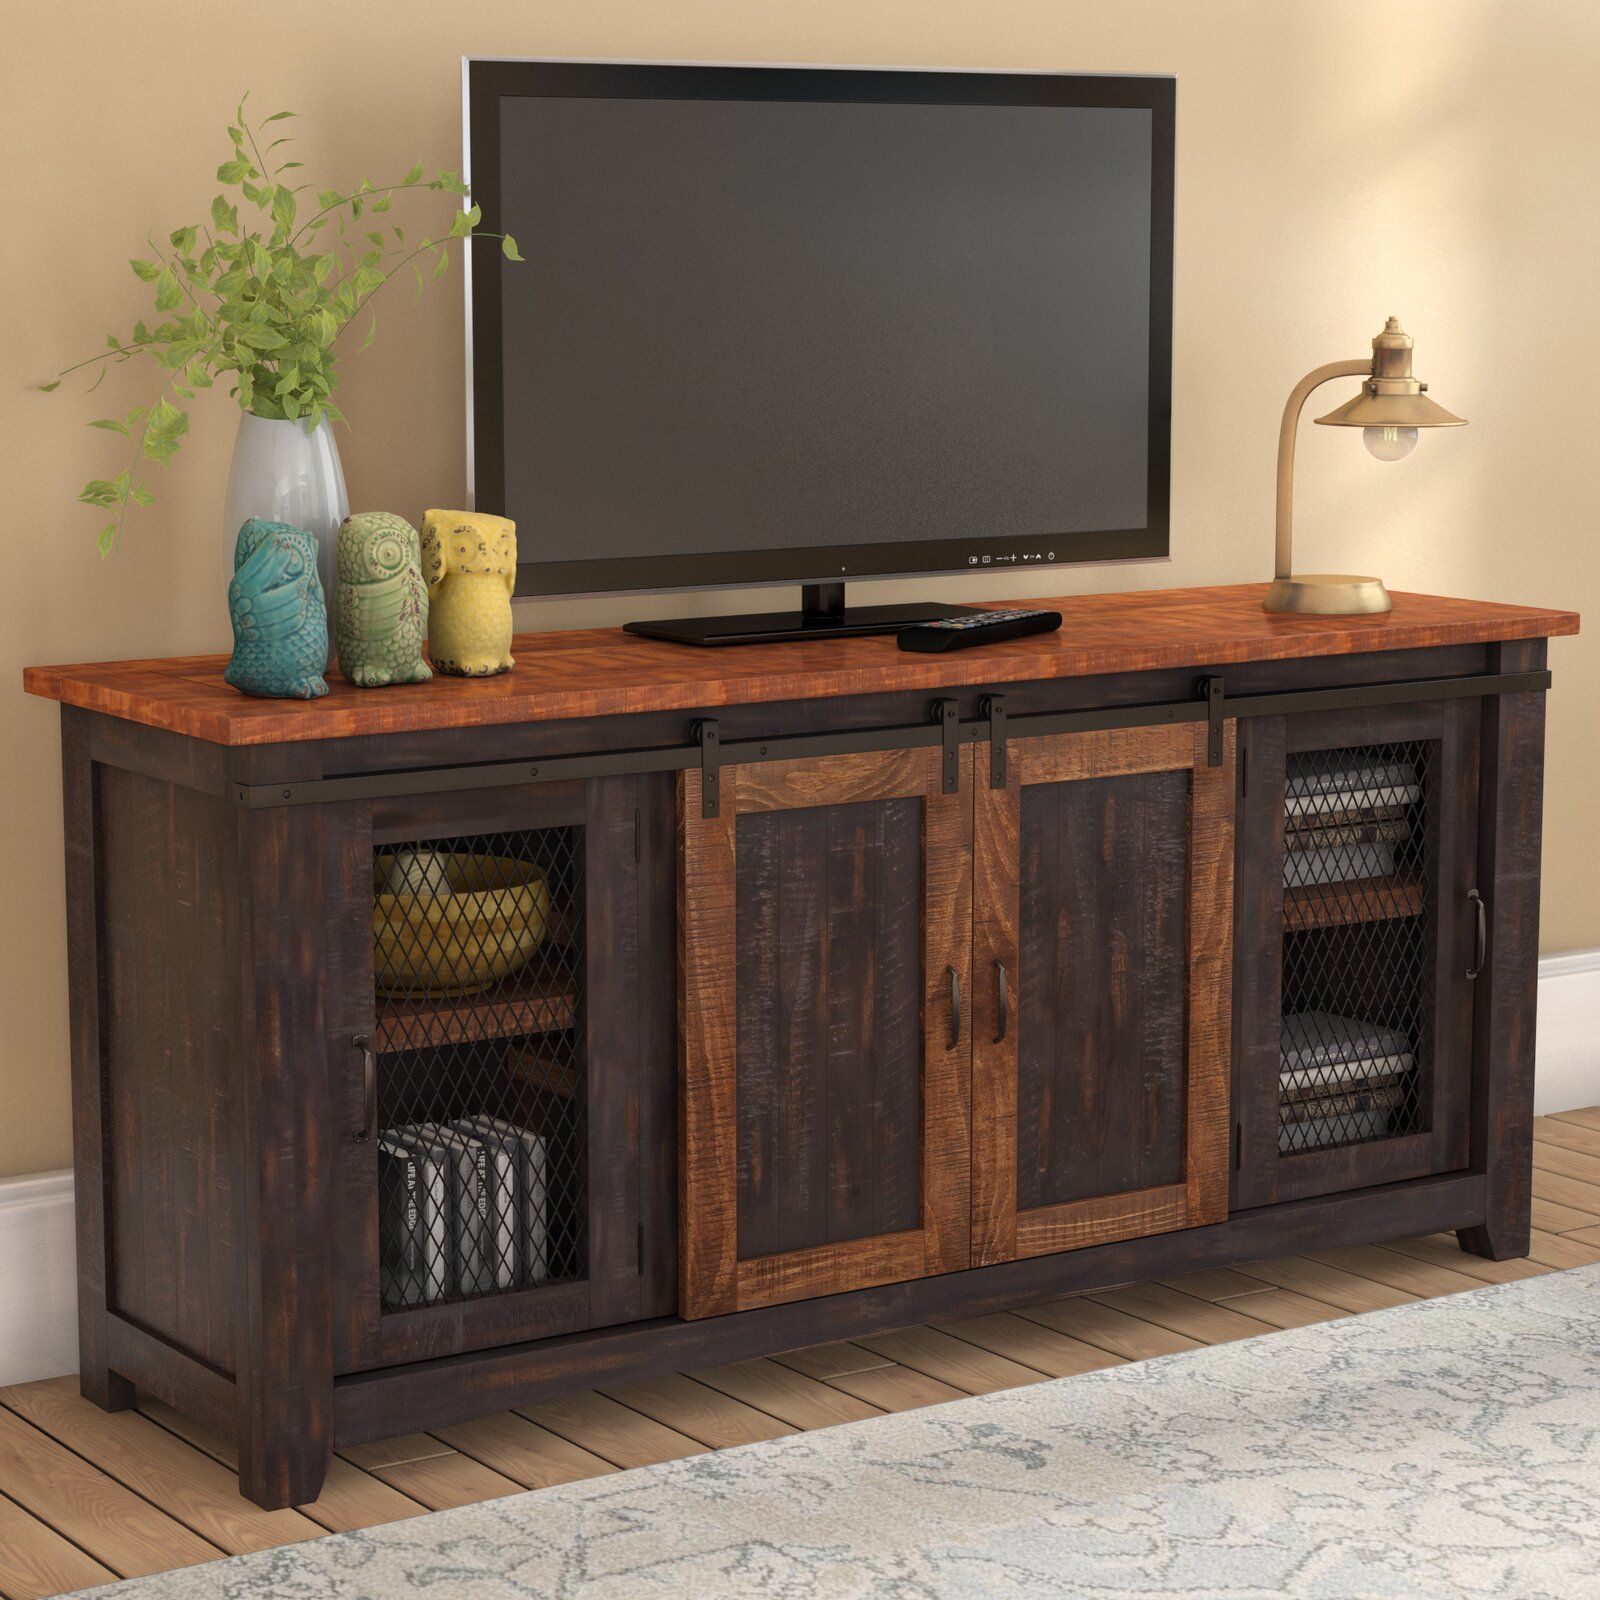 Belen Tv Stand For Tvs Up To 70" & Reviews | Joss & Main For Giltner Solid Wood Tv Stands For Tvs Up To 65" (View 5 of 15)